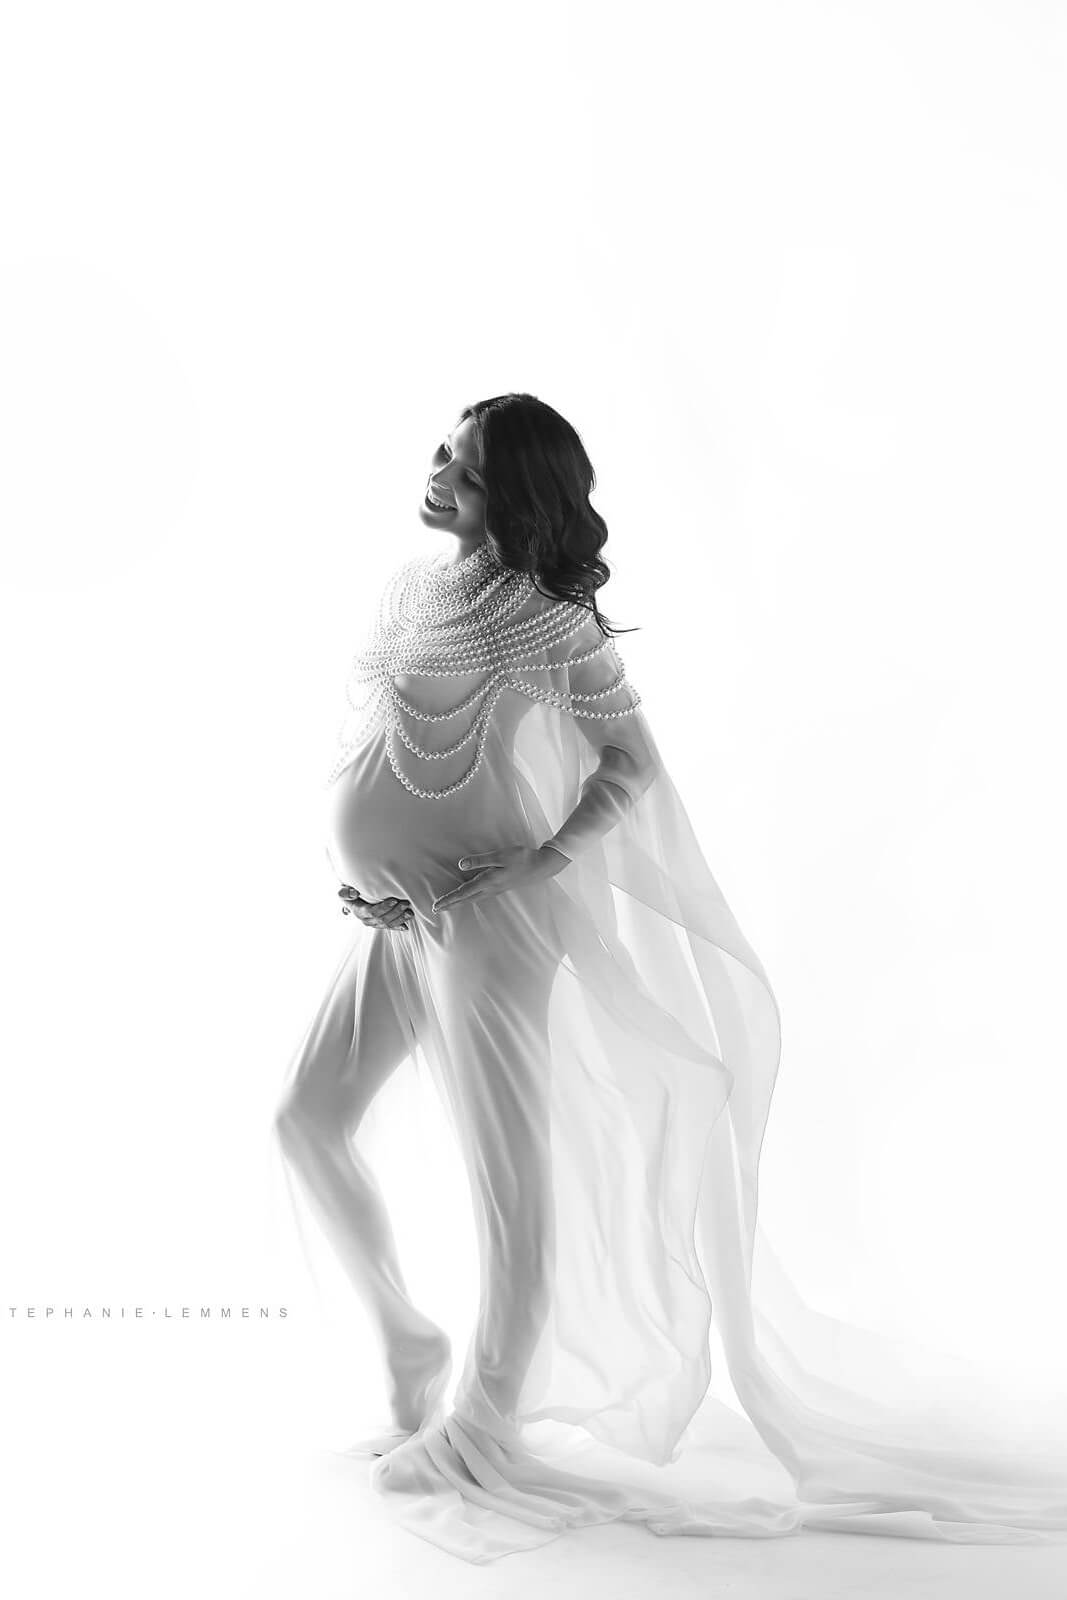 brunette pregnant model wearing a white and long chiffon cape. above the cape she has a very big pearl necklace to match the style.  